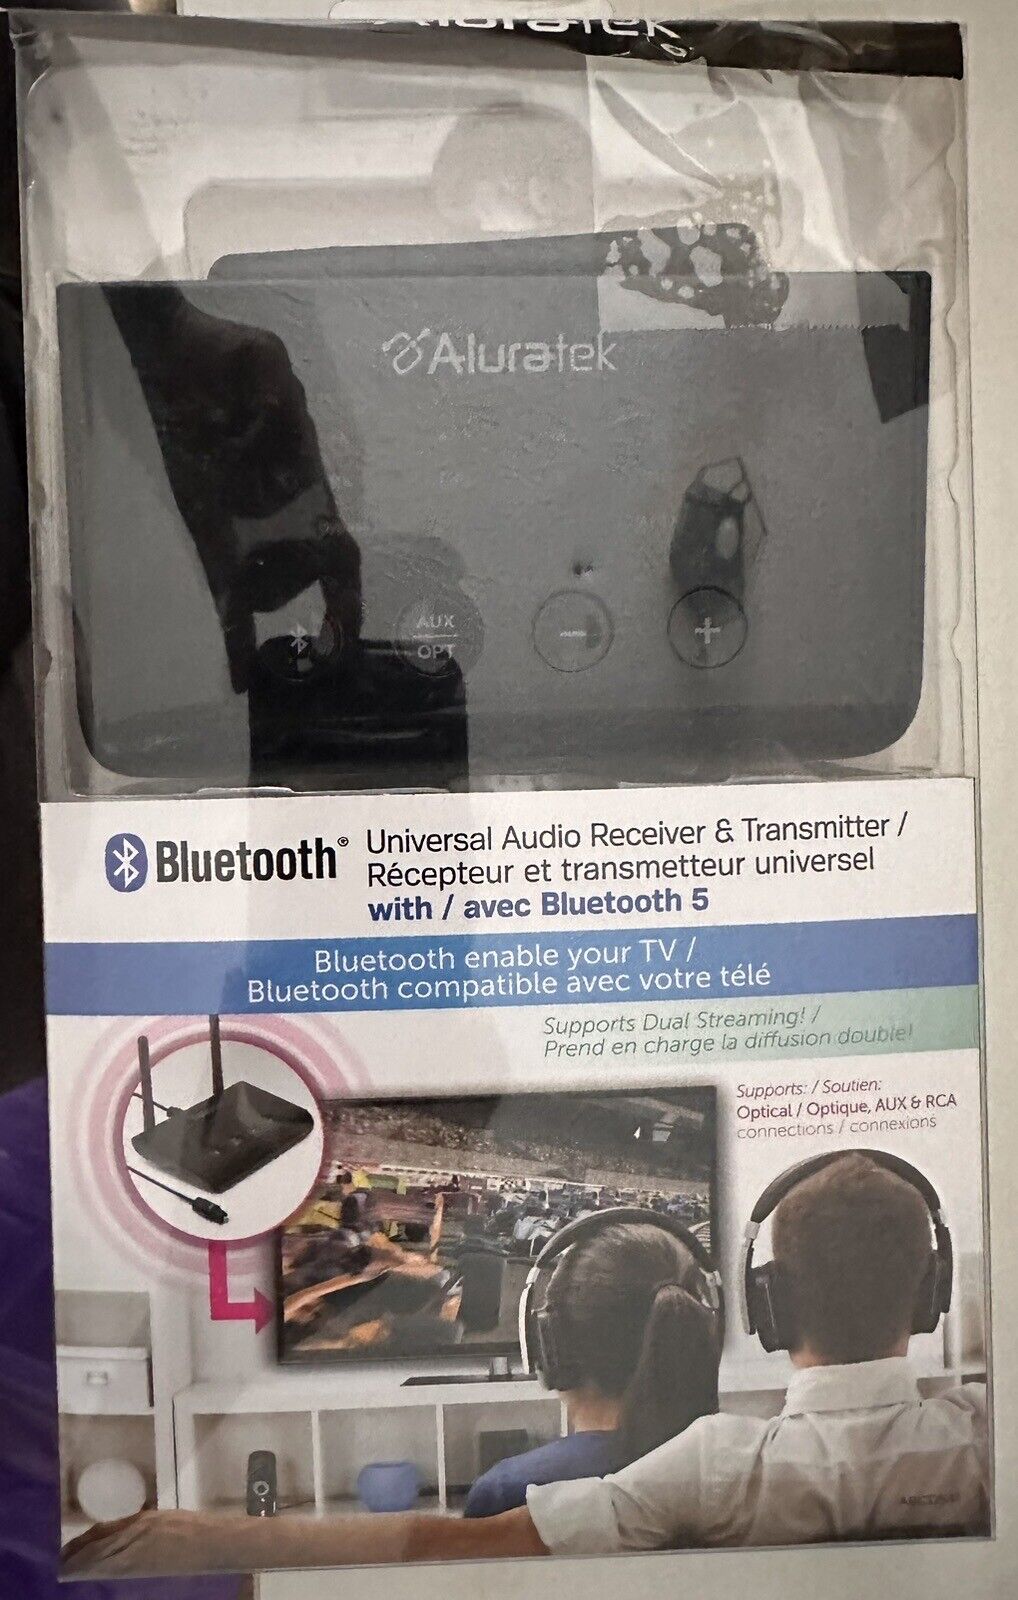 New Aluratek - Bluetooth Wireless Audio Transmitter and Receiver for TVs - Black